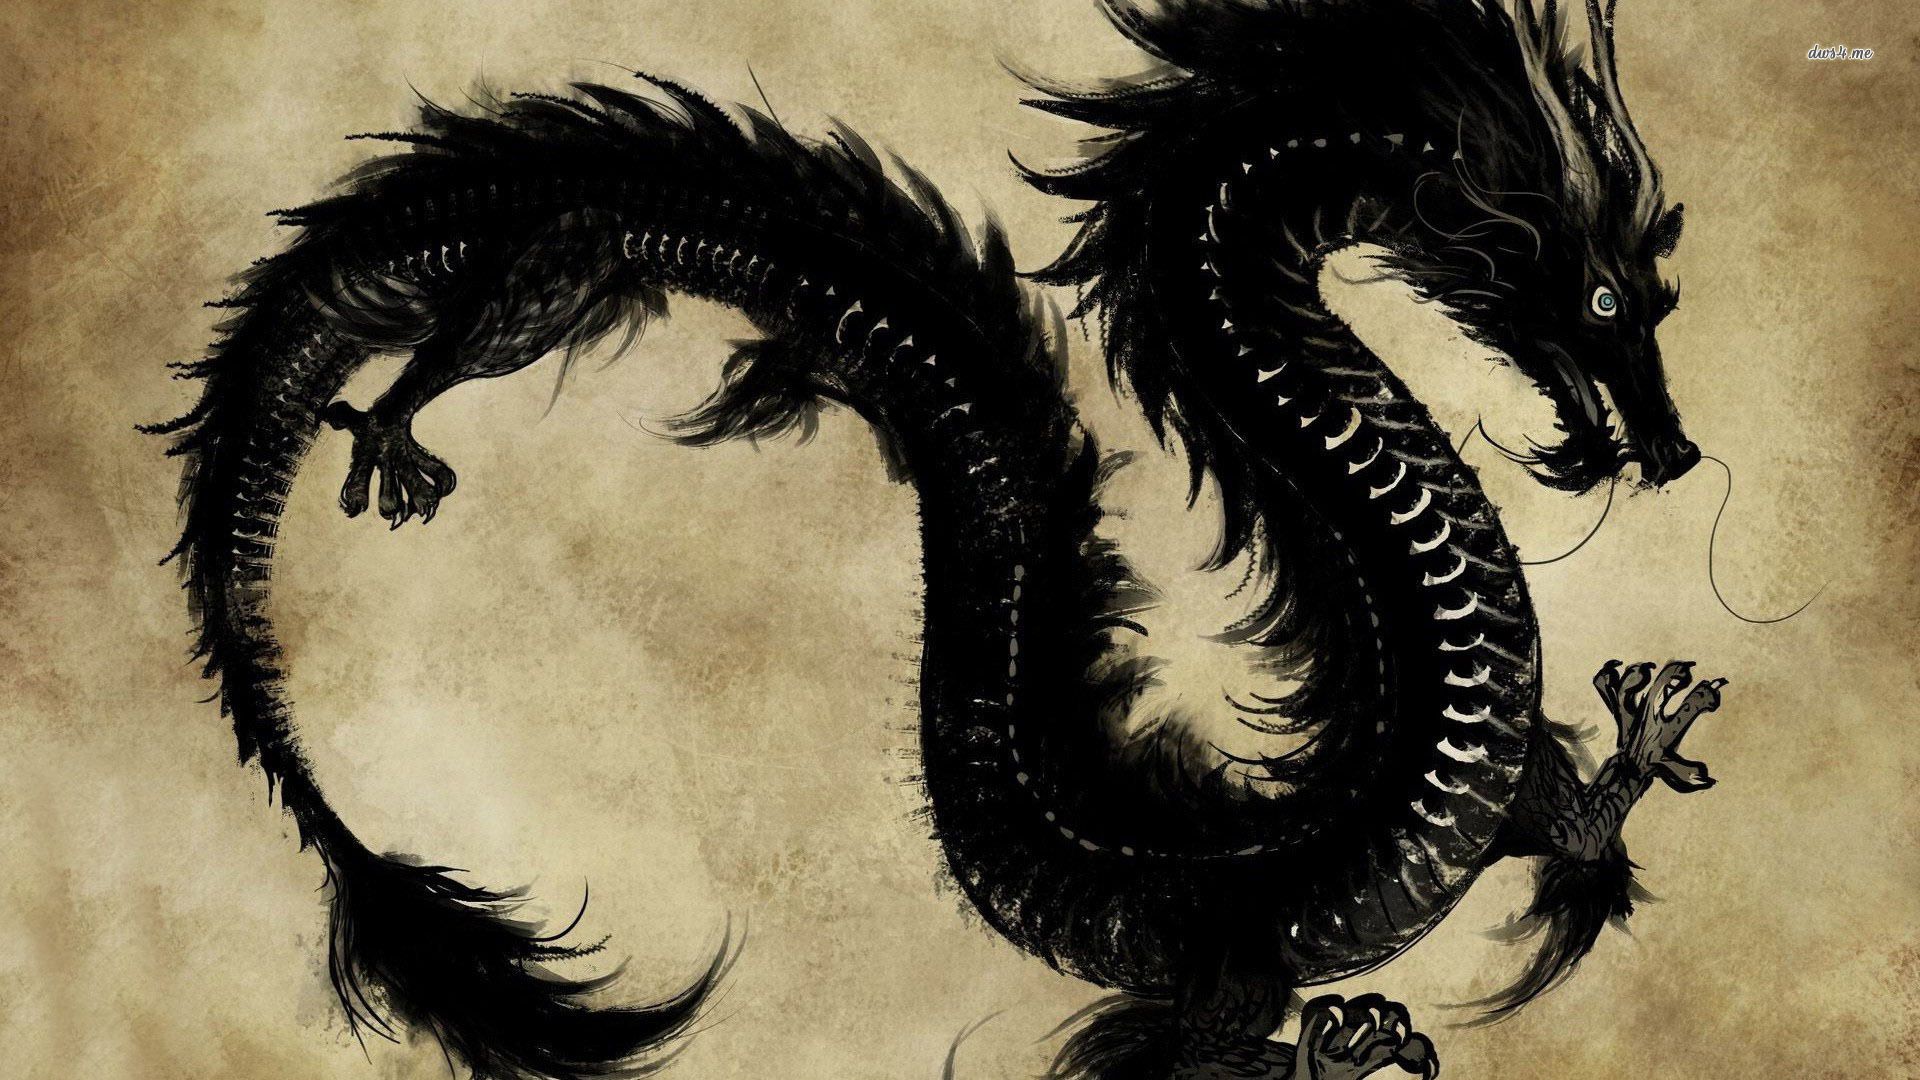 Black Dragon Background Wallpapers 10102 - Amazing Wallpaperz